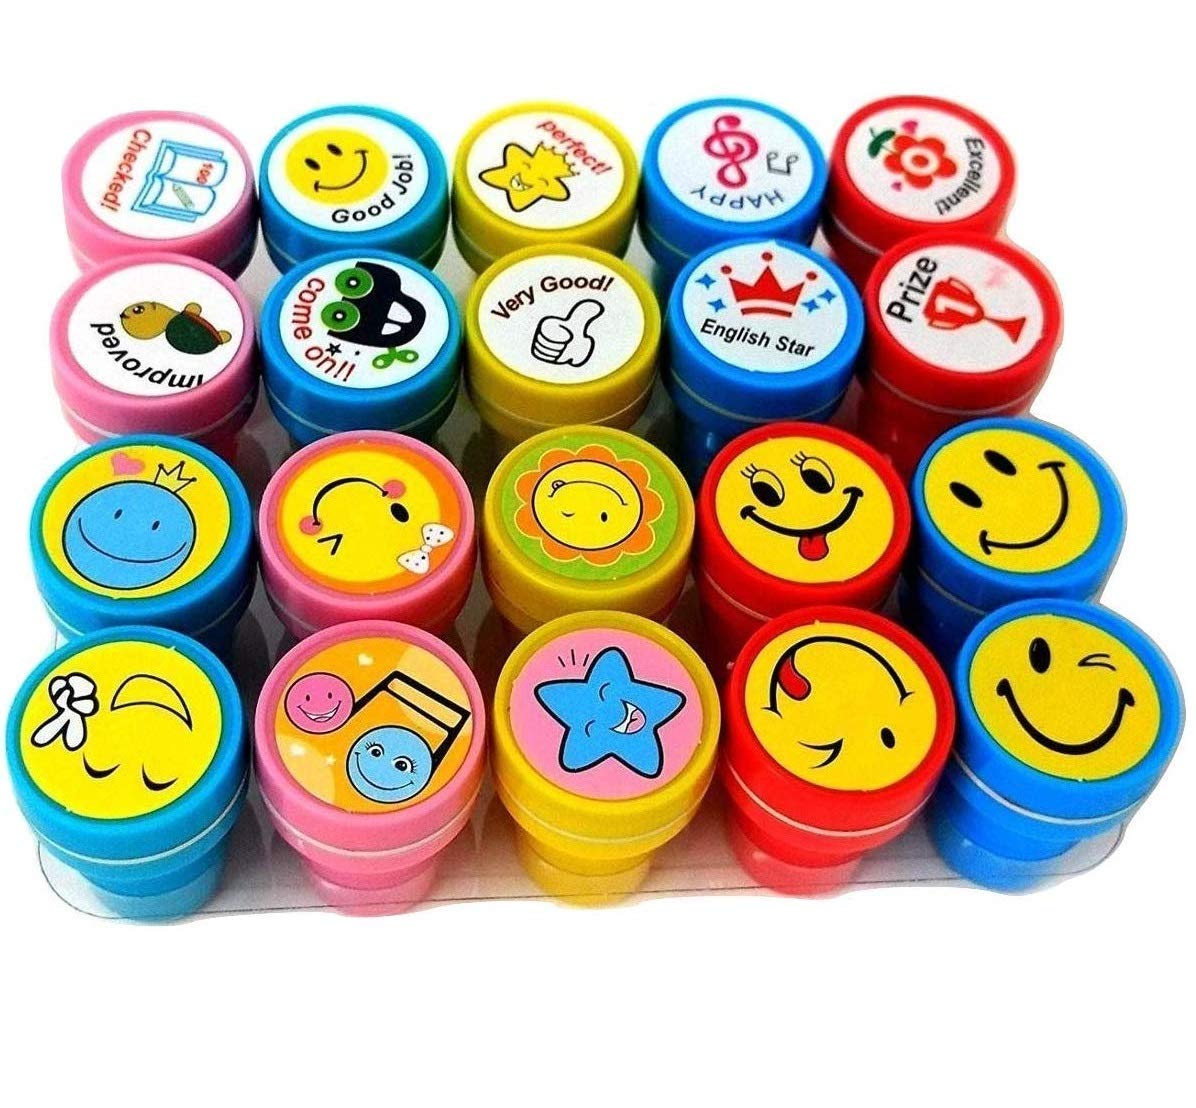 Weshopaholic 20 piece stamps for kids 10 emoji and 10 motivation reward pencil top stamp gift for teachers students and parents toy- Multi color